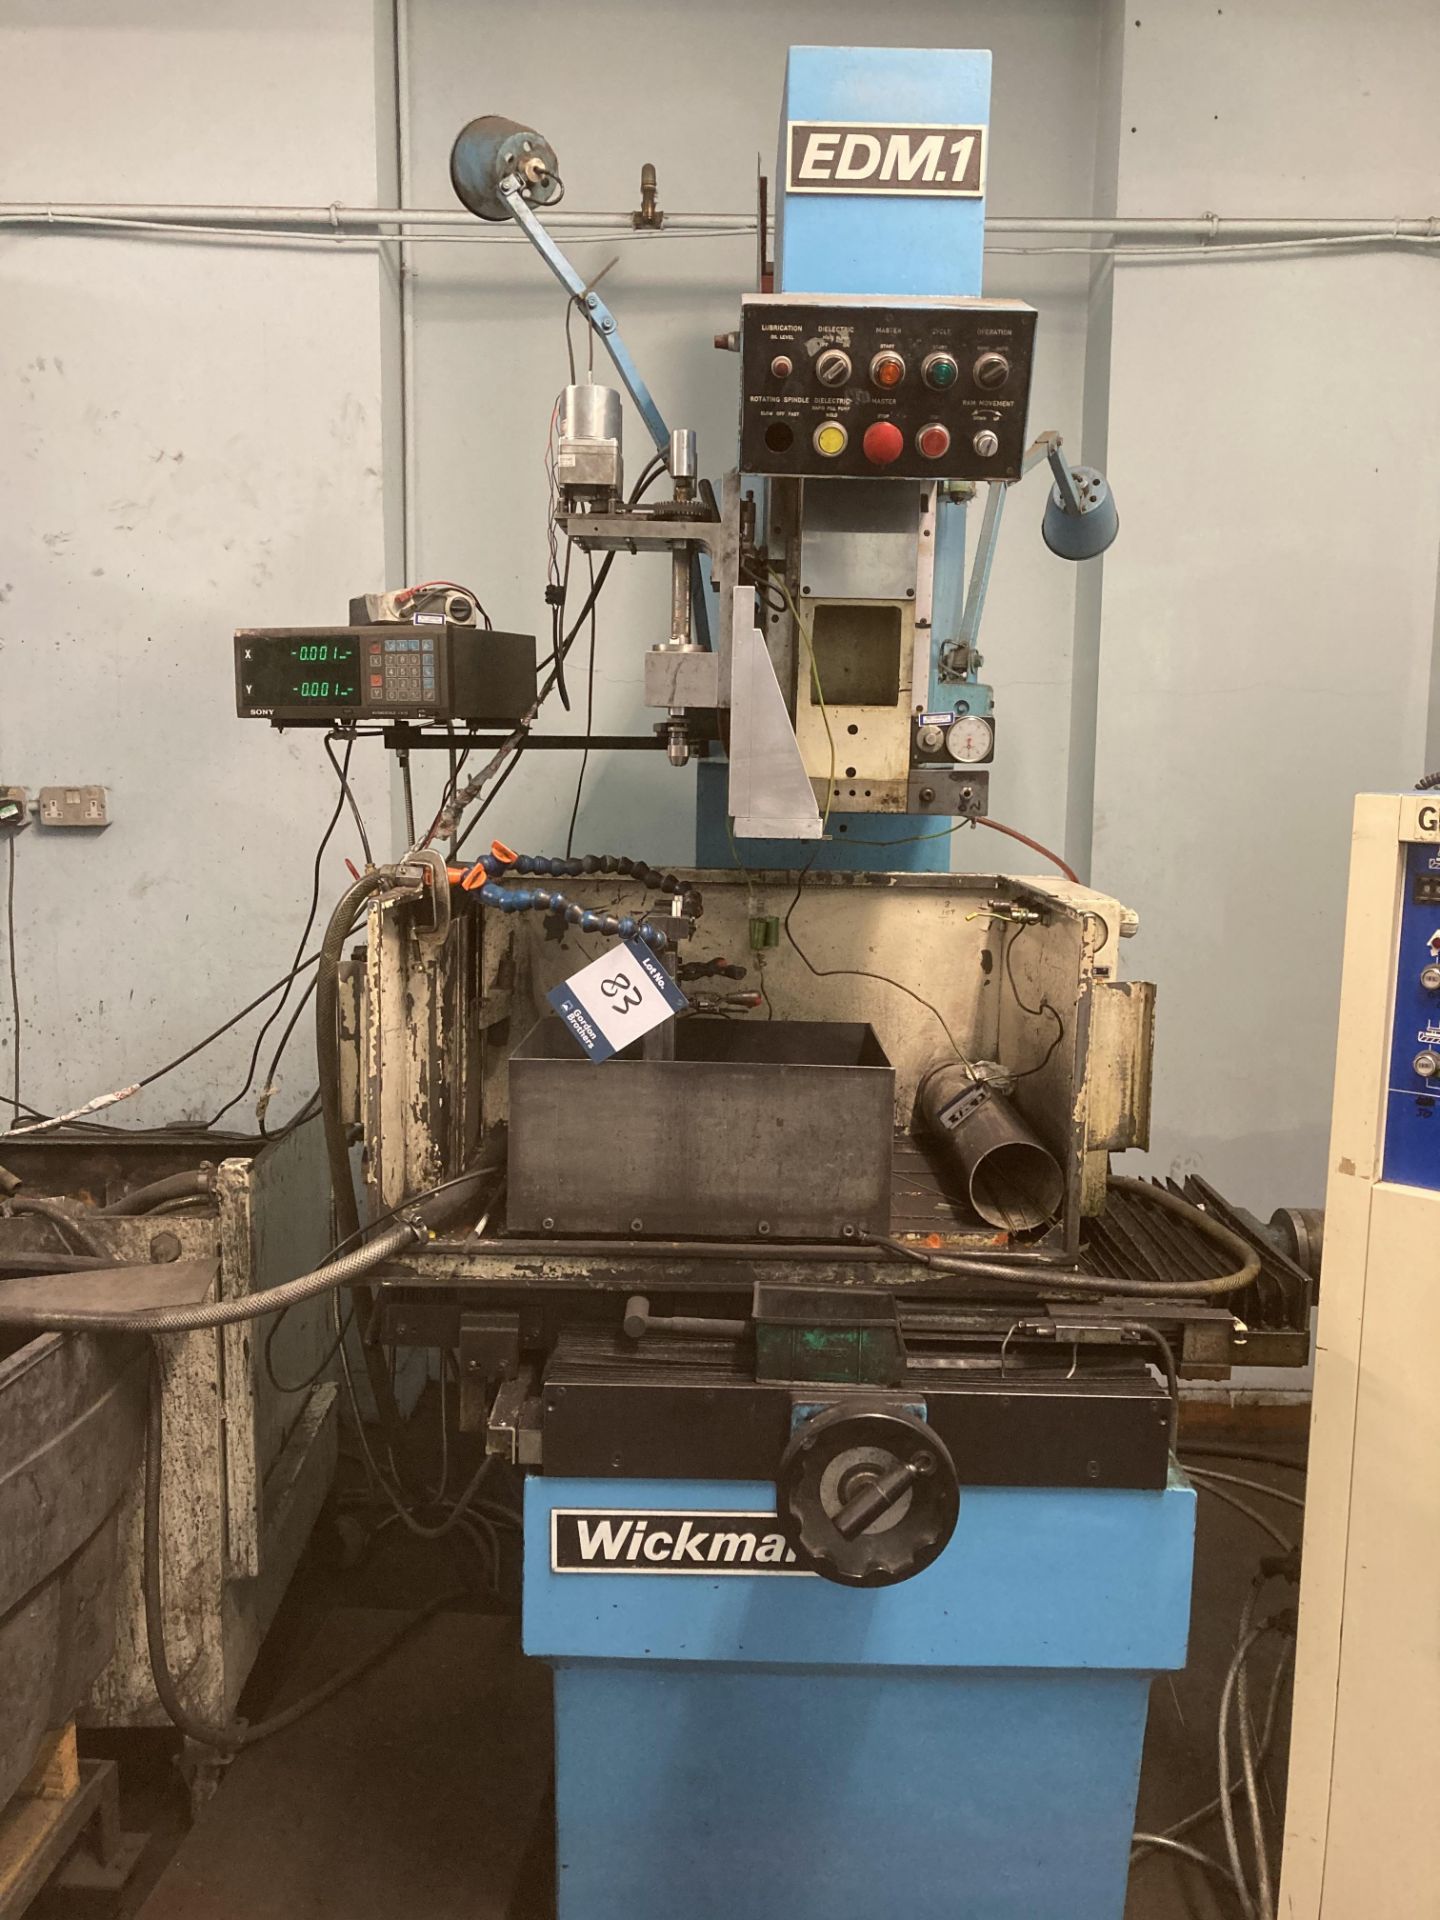 Wickman EDM 1 electrical discharge machine, Serial No. n/a , table size 600mm x 400mm with